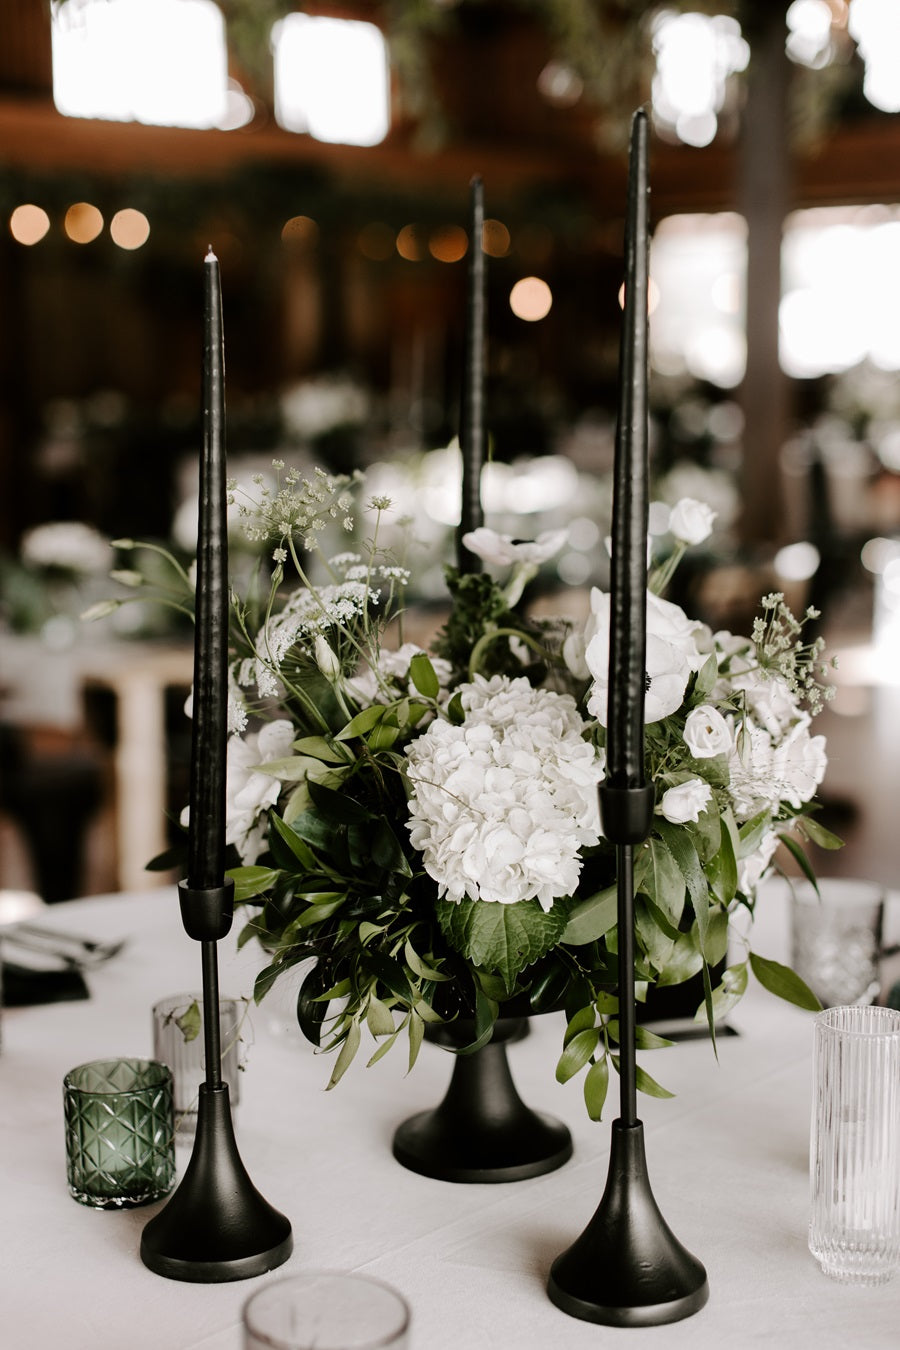 Close up on a floral centerpiece with white/green/black, accented with black taper candles and green/transparent votive candles.